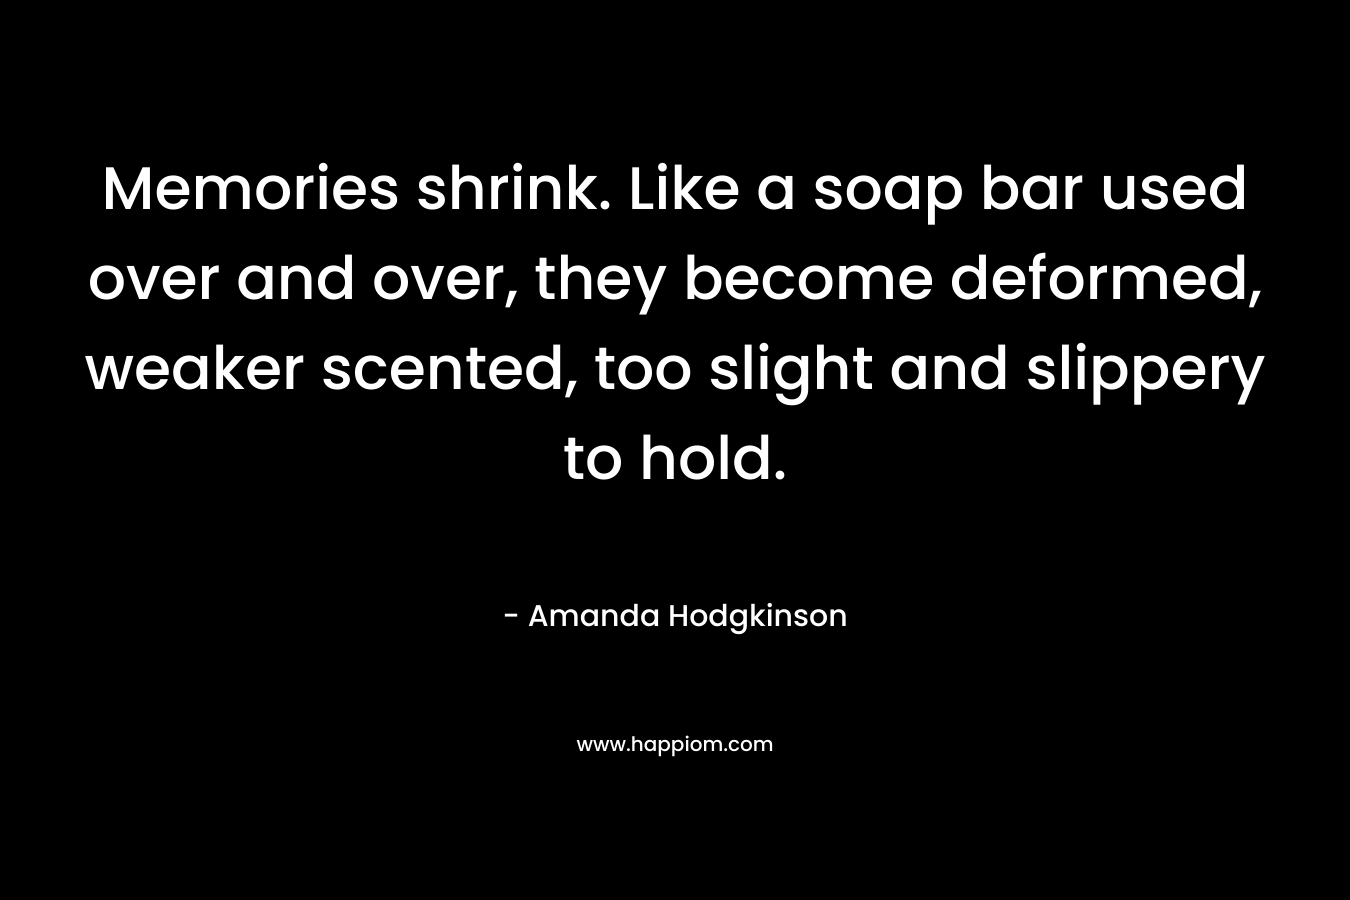 Memories shrink. Like a soap bar used over and over, they become deformed, weaker scented, too slight and slippery to hold. – Amanda Hodgkinson